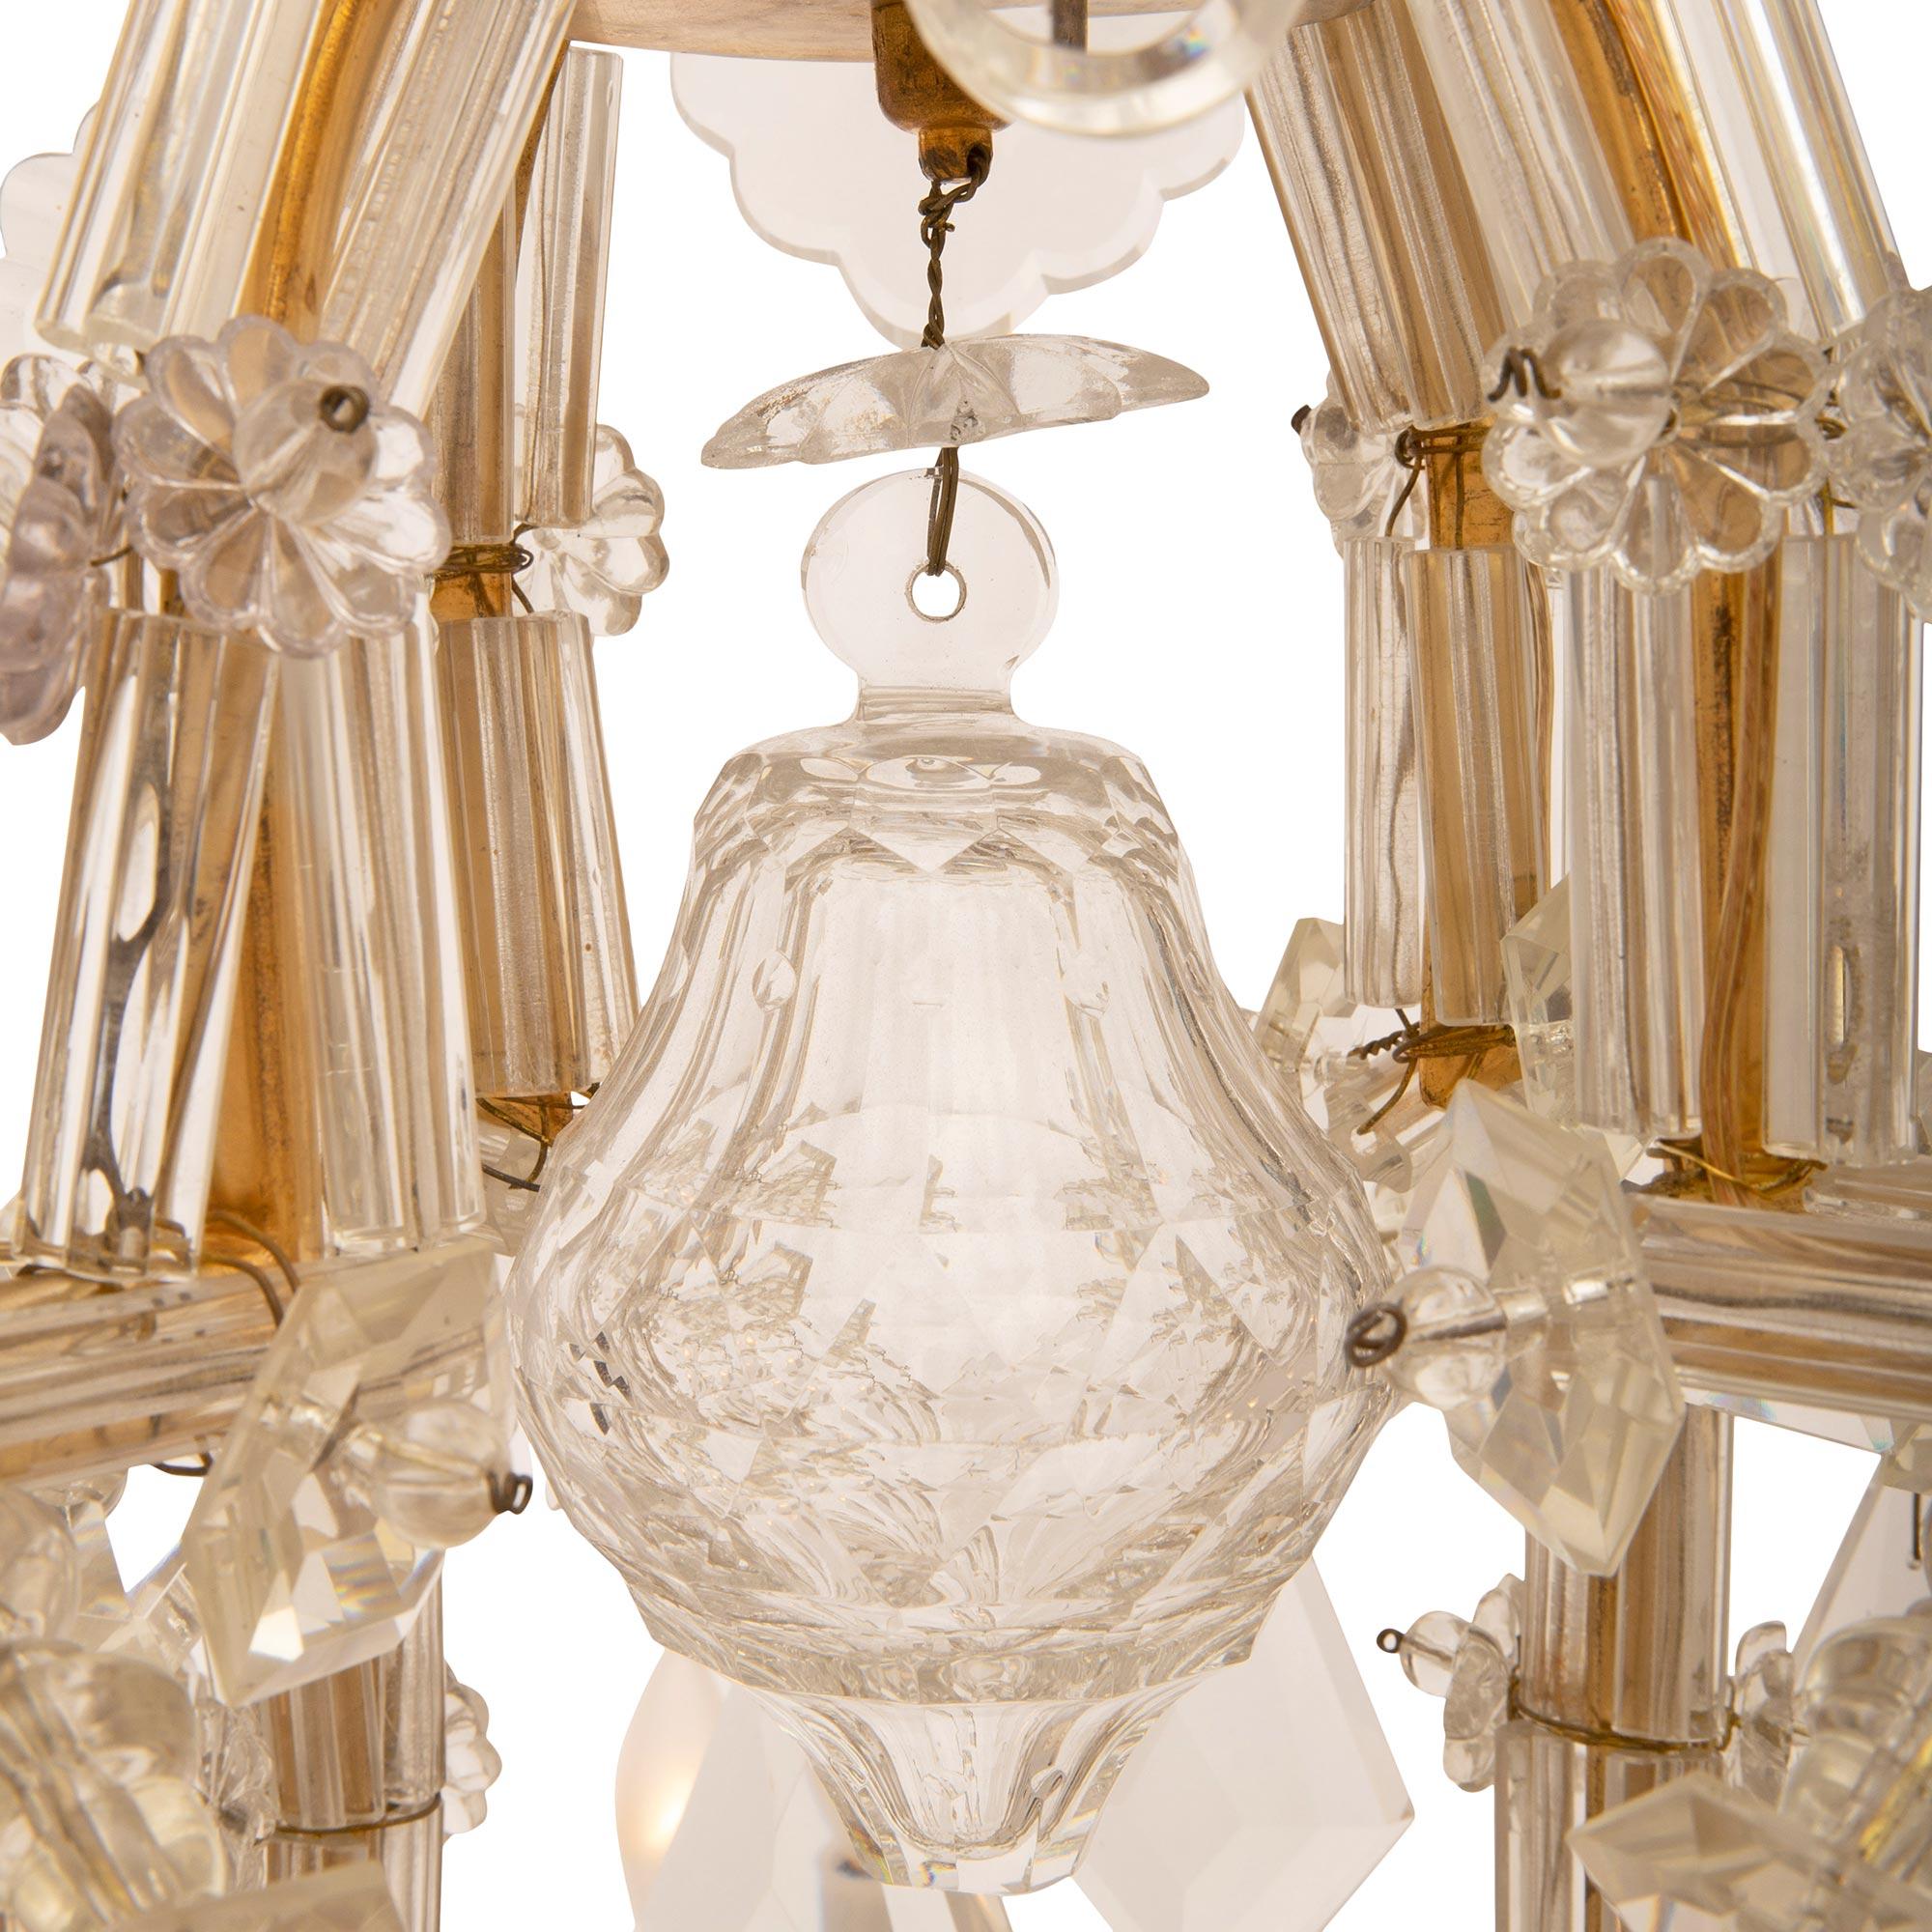 French Mid-19th Century Louis XV Style Ormolu and Baccarat Crystal Chandelier For Sale 2